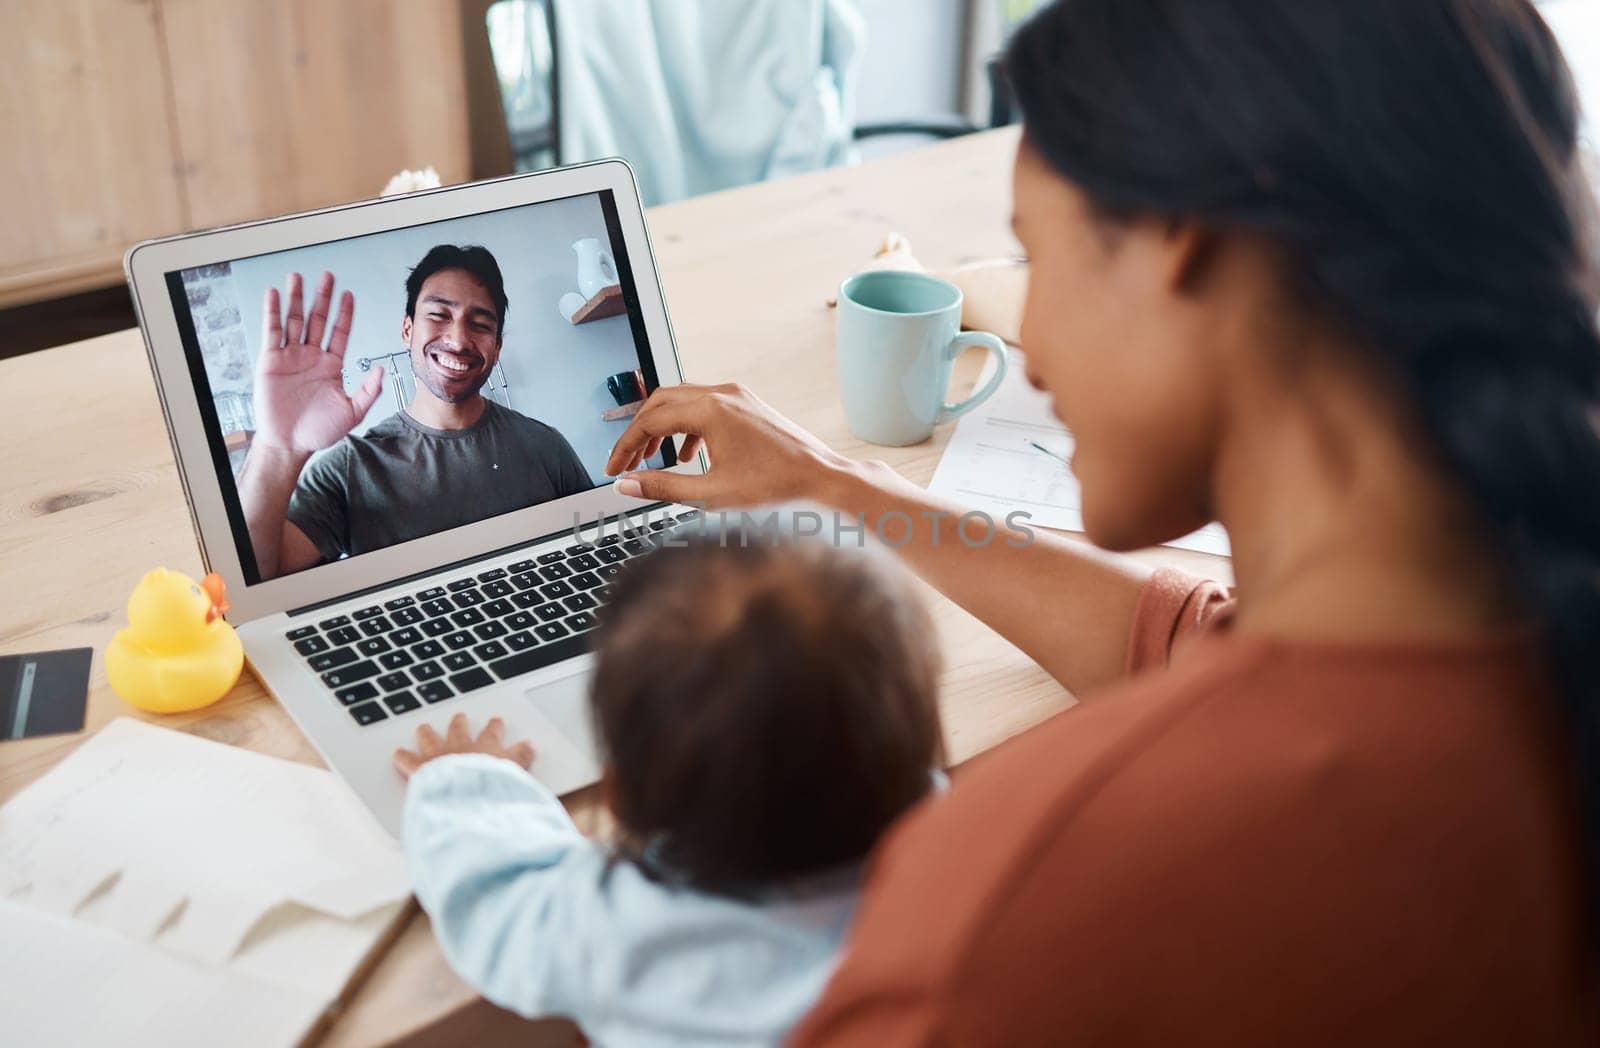 Family on video call, mom and baby happy to see smiling father waving with laptop webcam to talk to each other. Mother, young child talking to dad at work from home and using 5g streaming technology by YuriArcurs